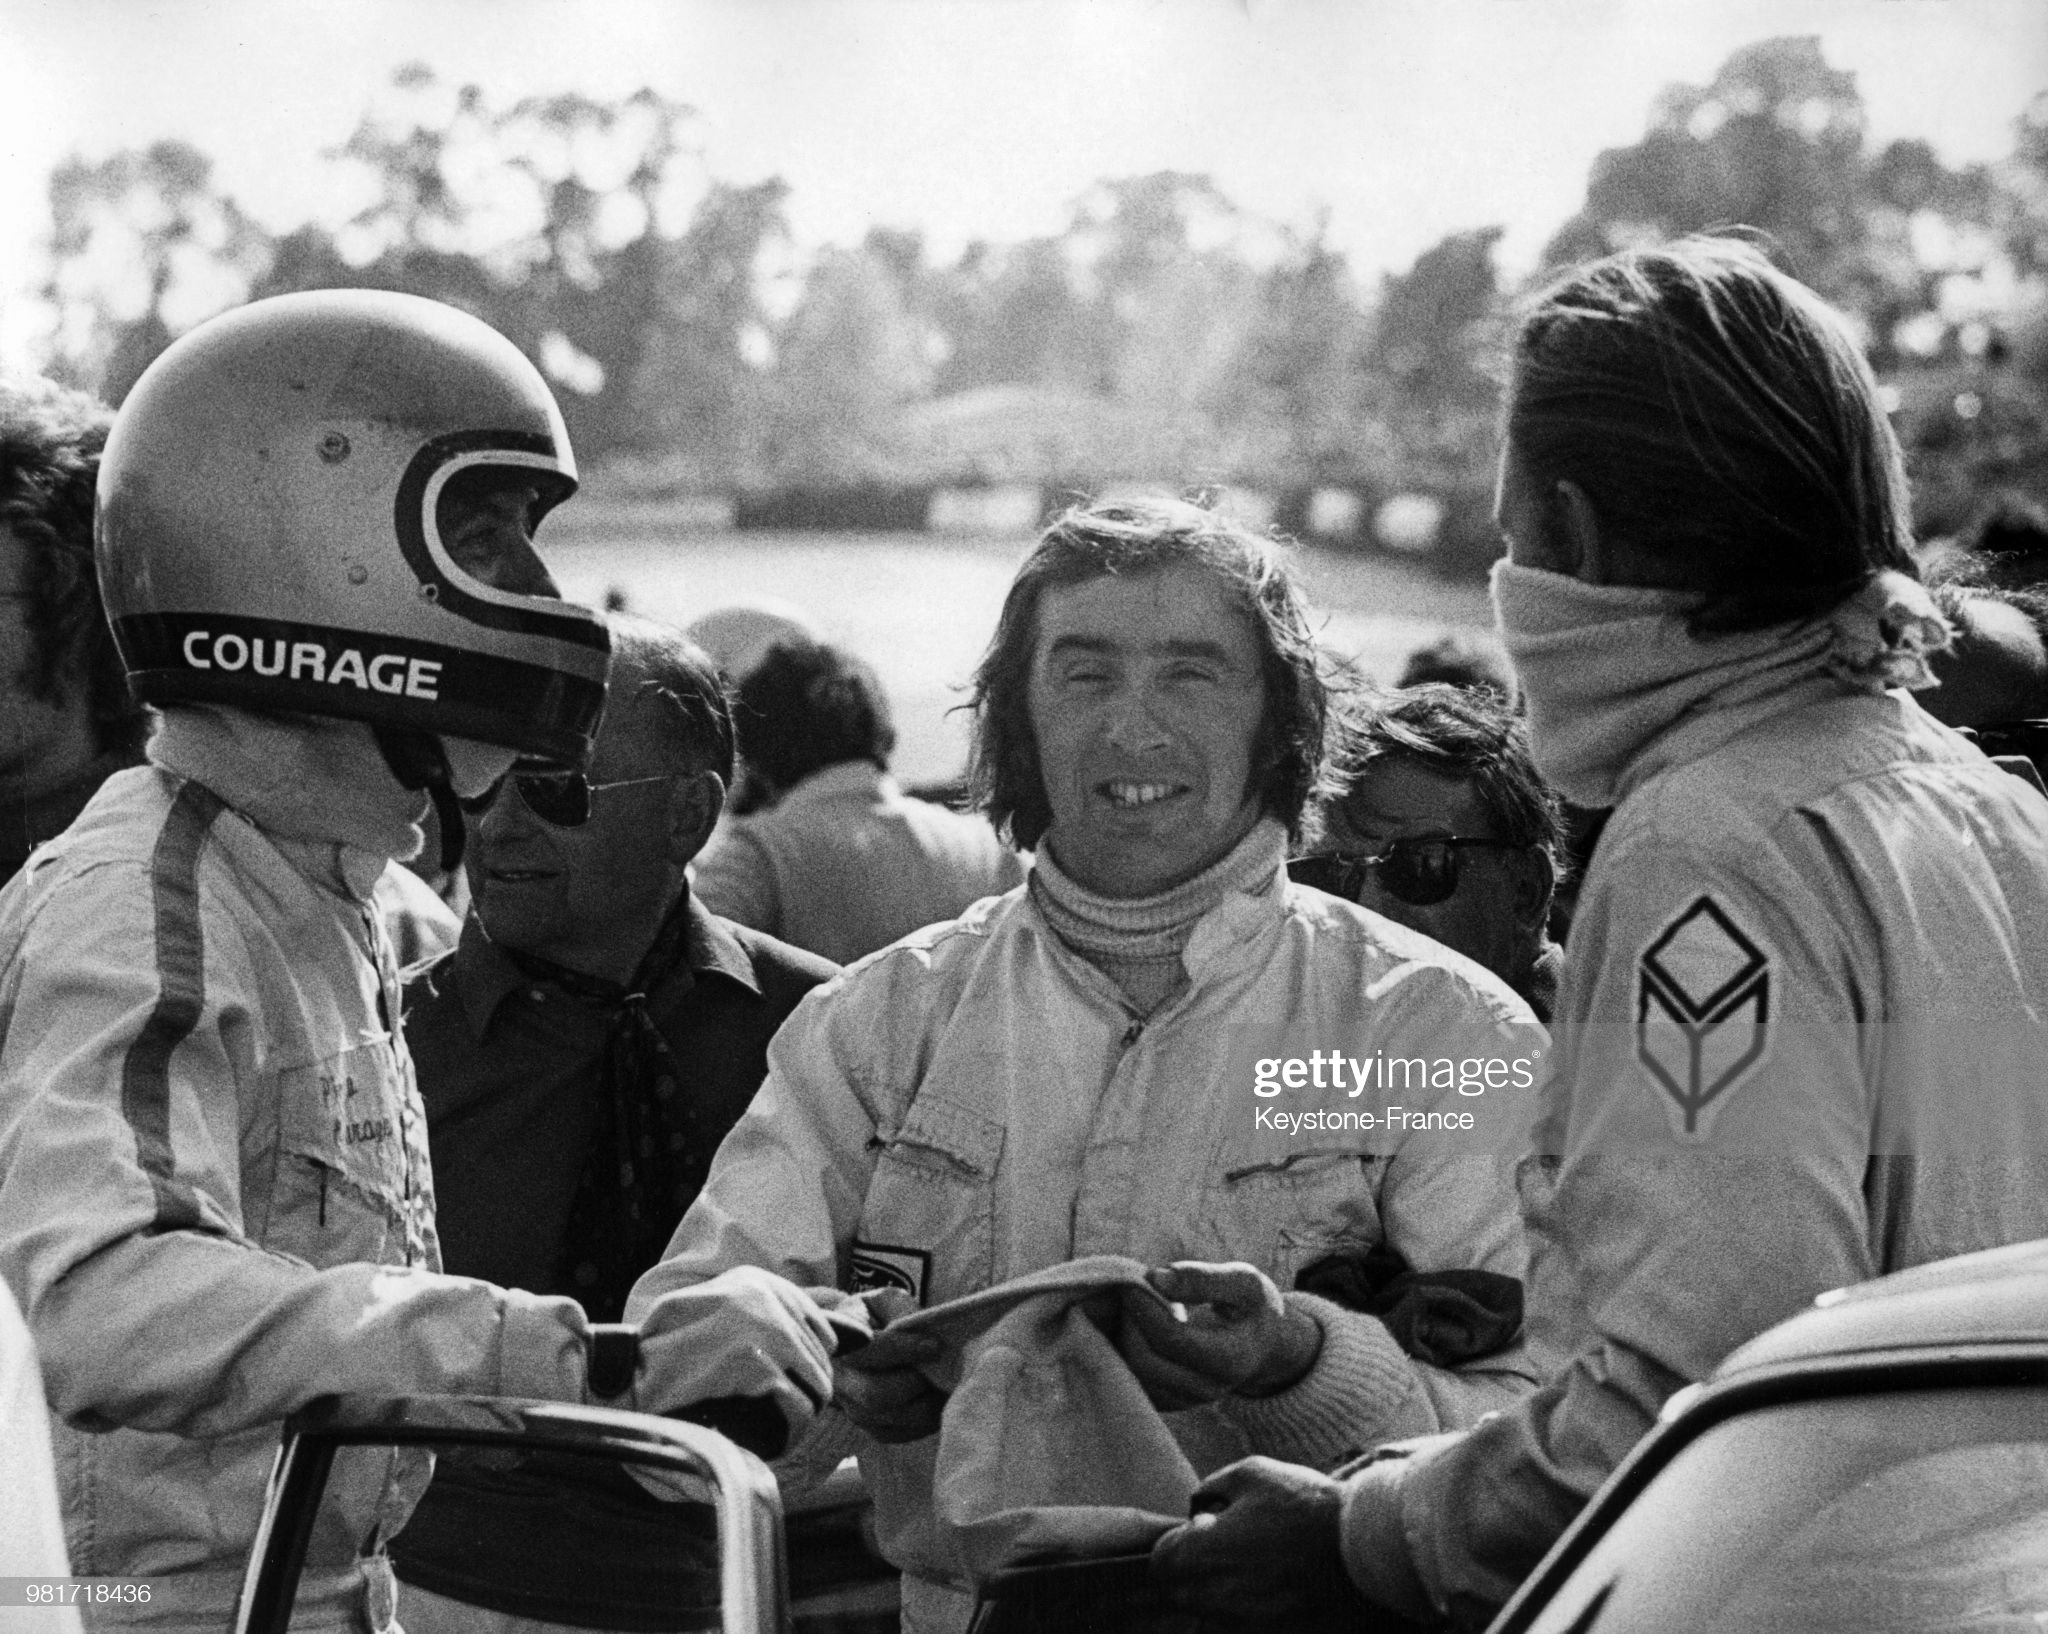 Piers Courage, Jackie Stewart and Graham Hill.